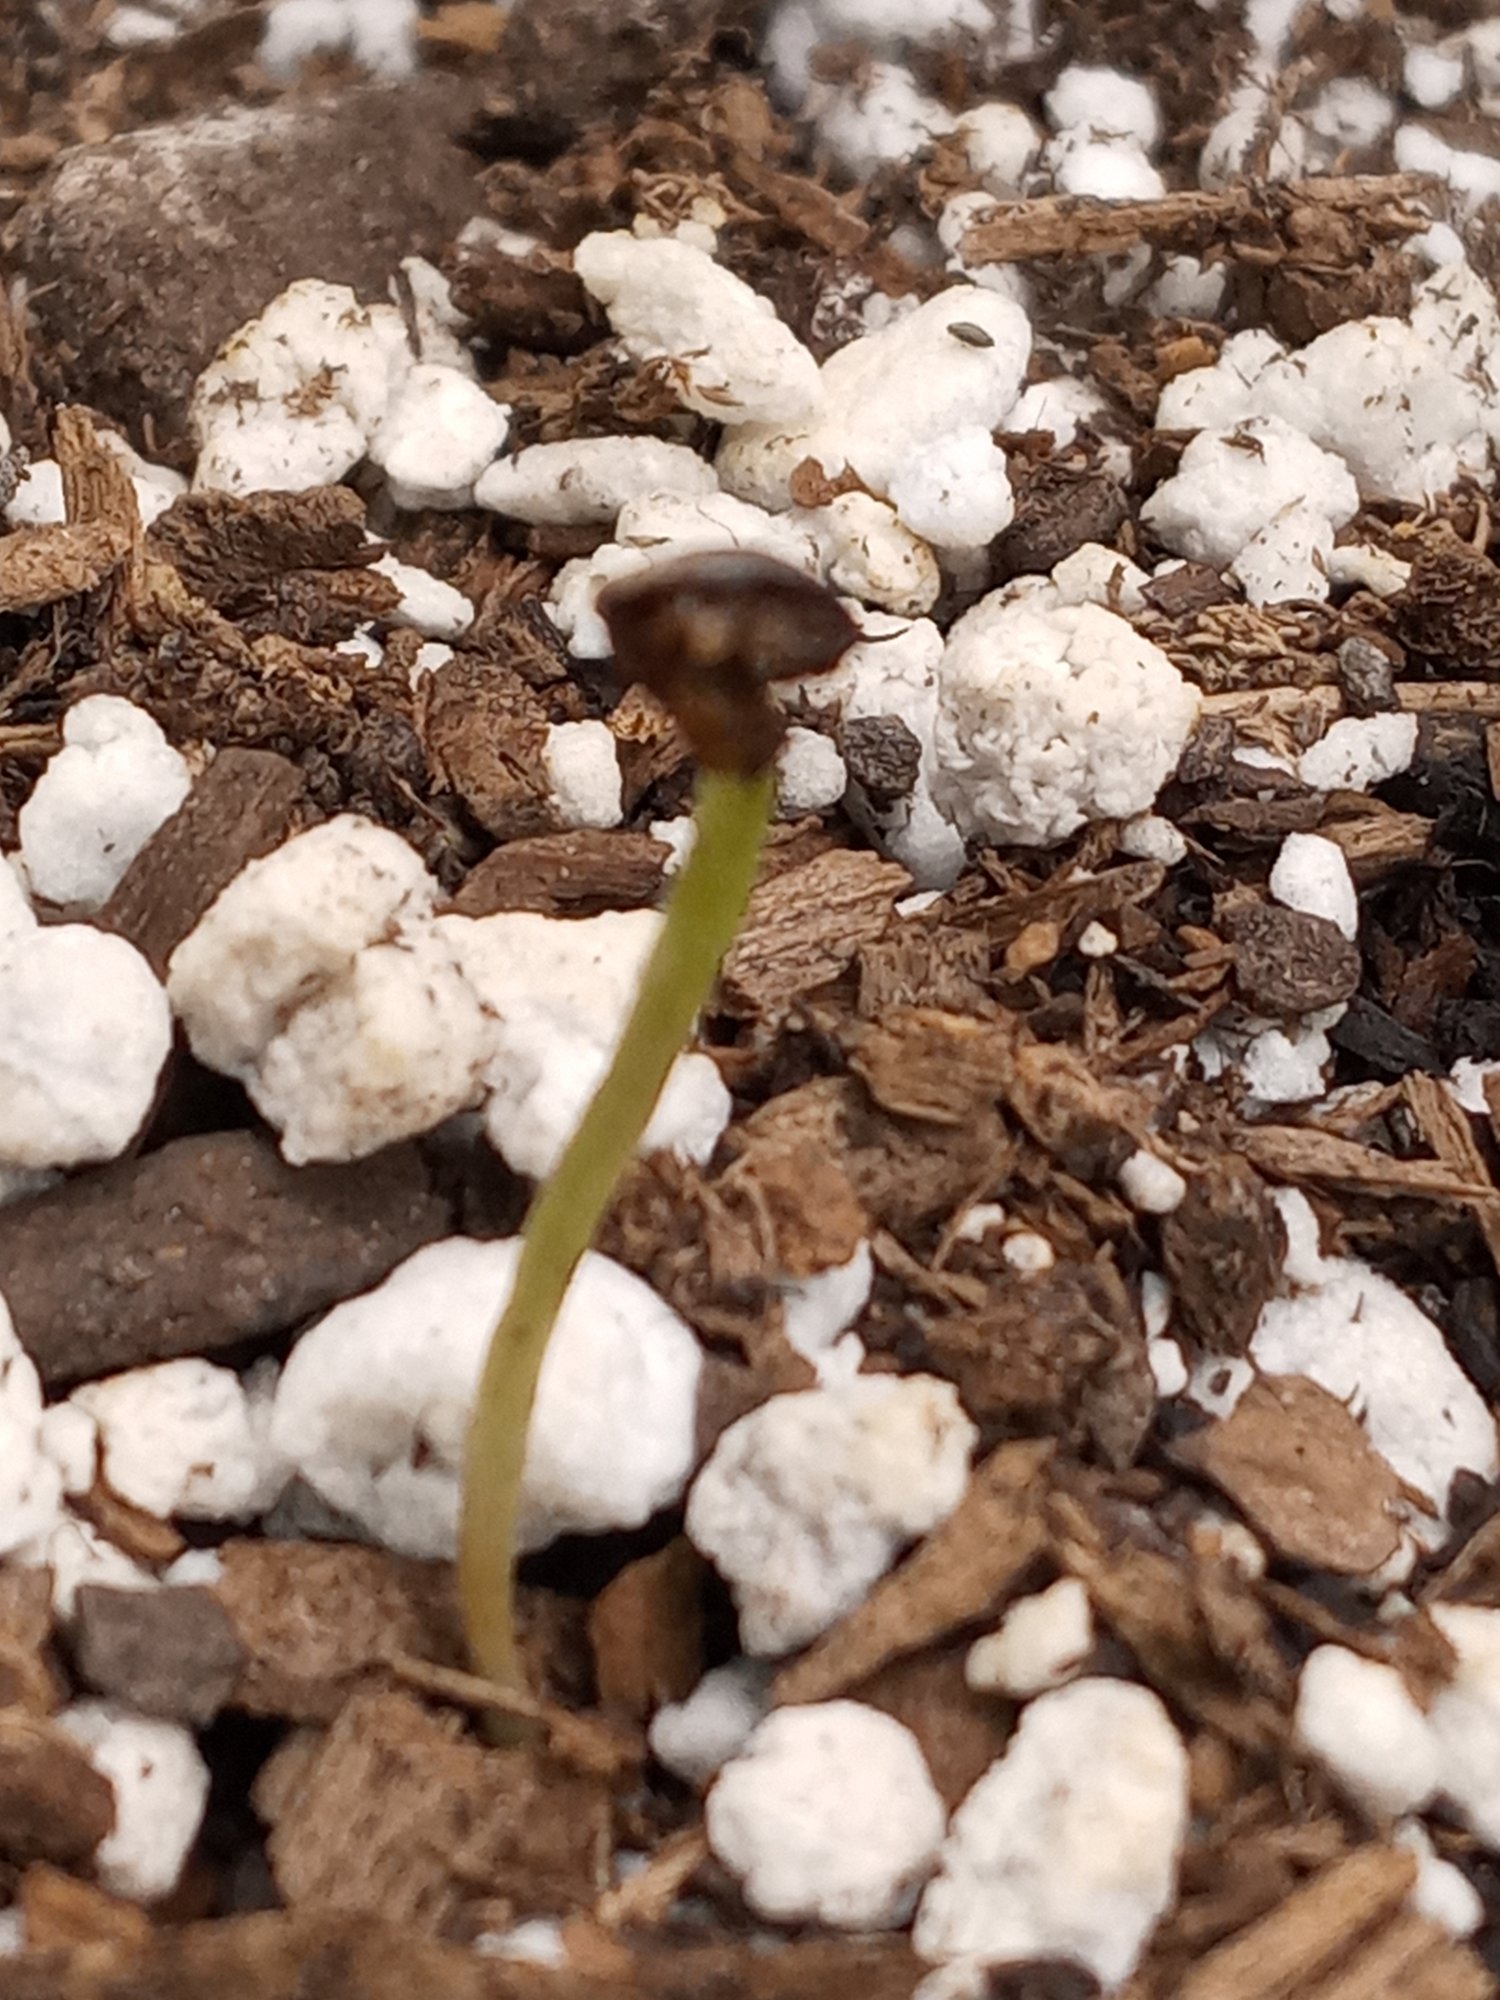 Whats wrong with this seedling 3